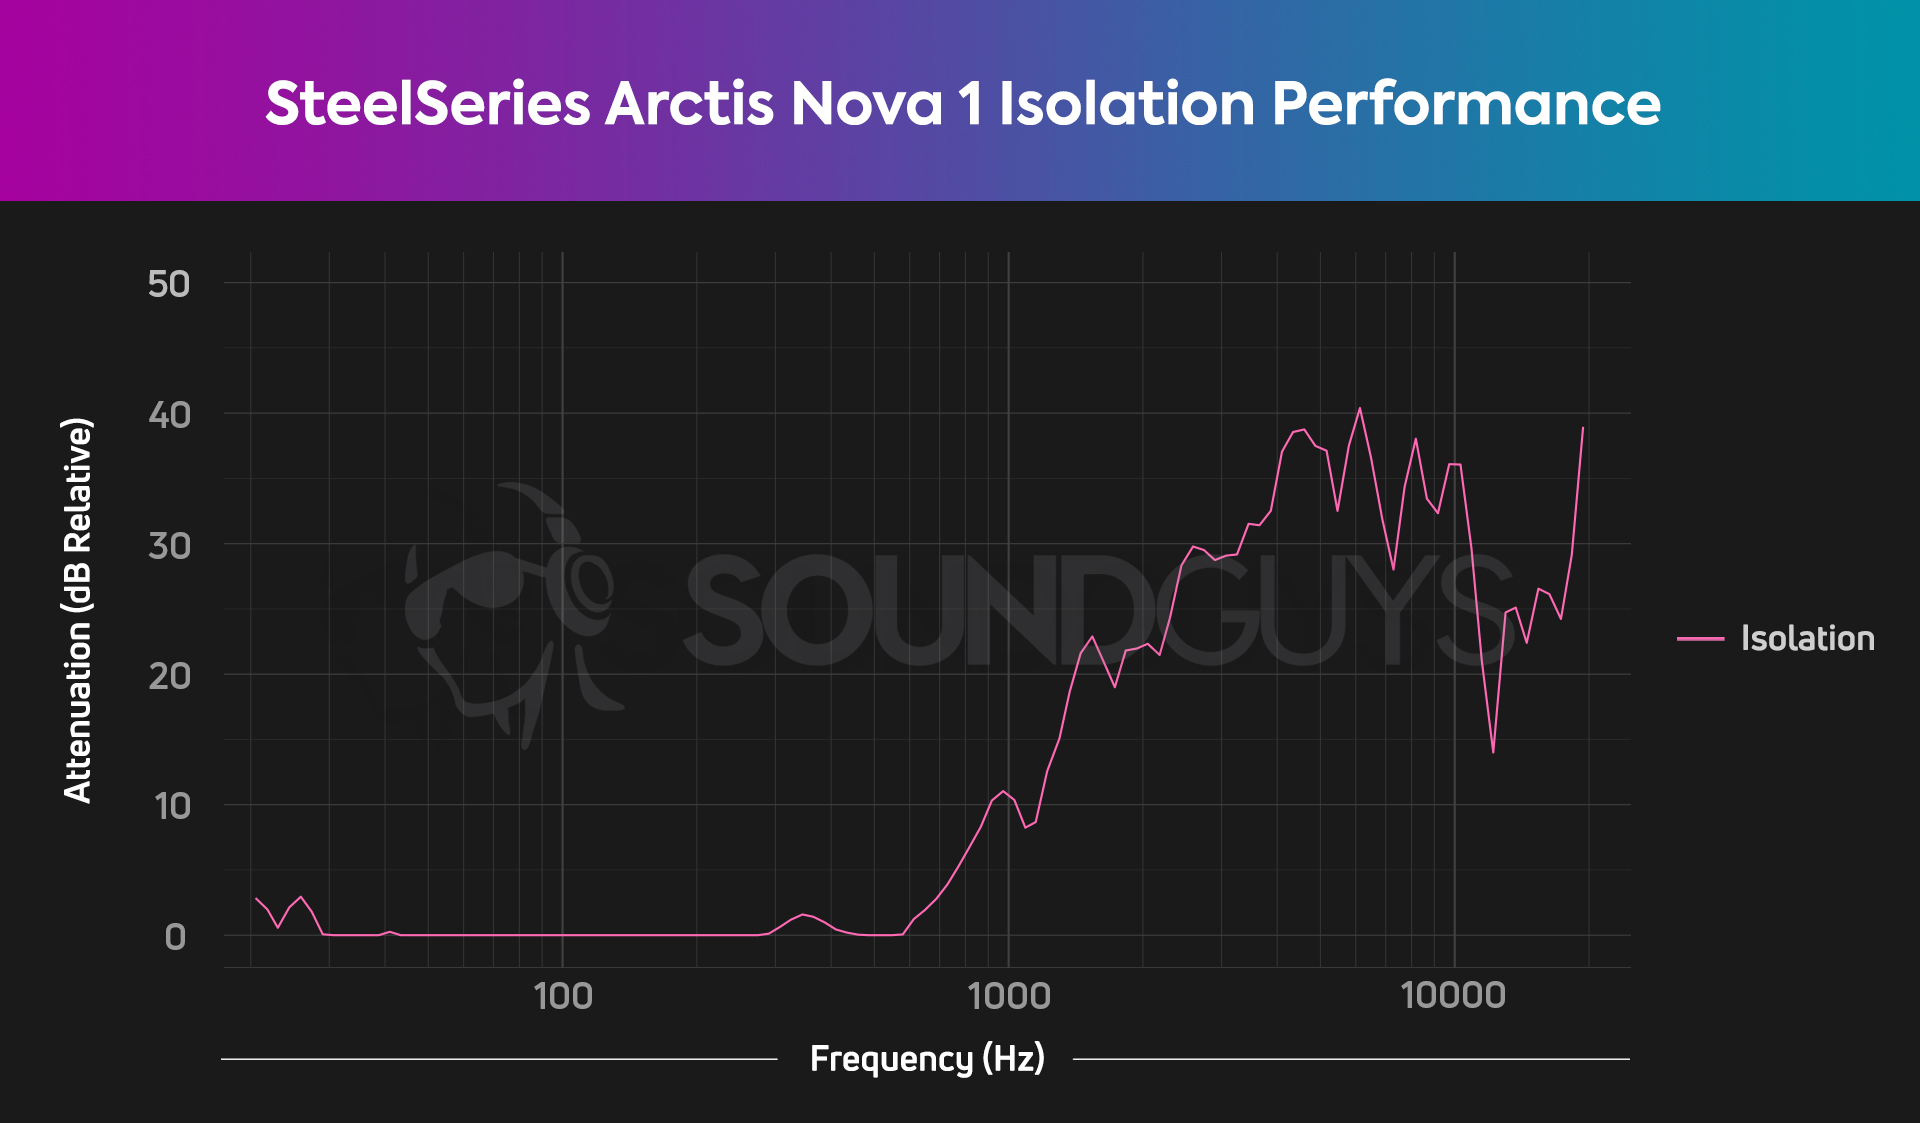 The graph describing the noise isolation of the SteelSeries Arctis Nova 1, showing generally midling isolation.